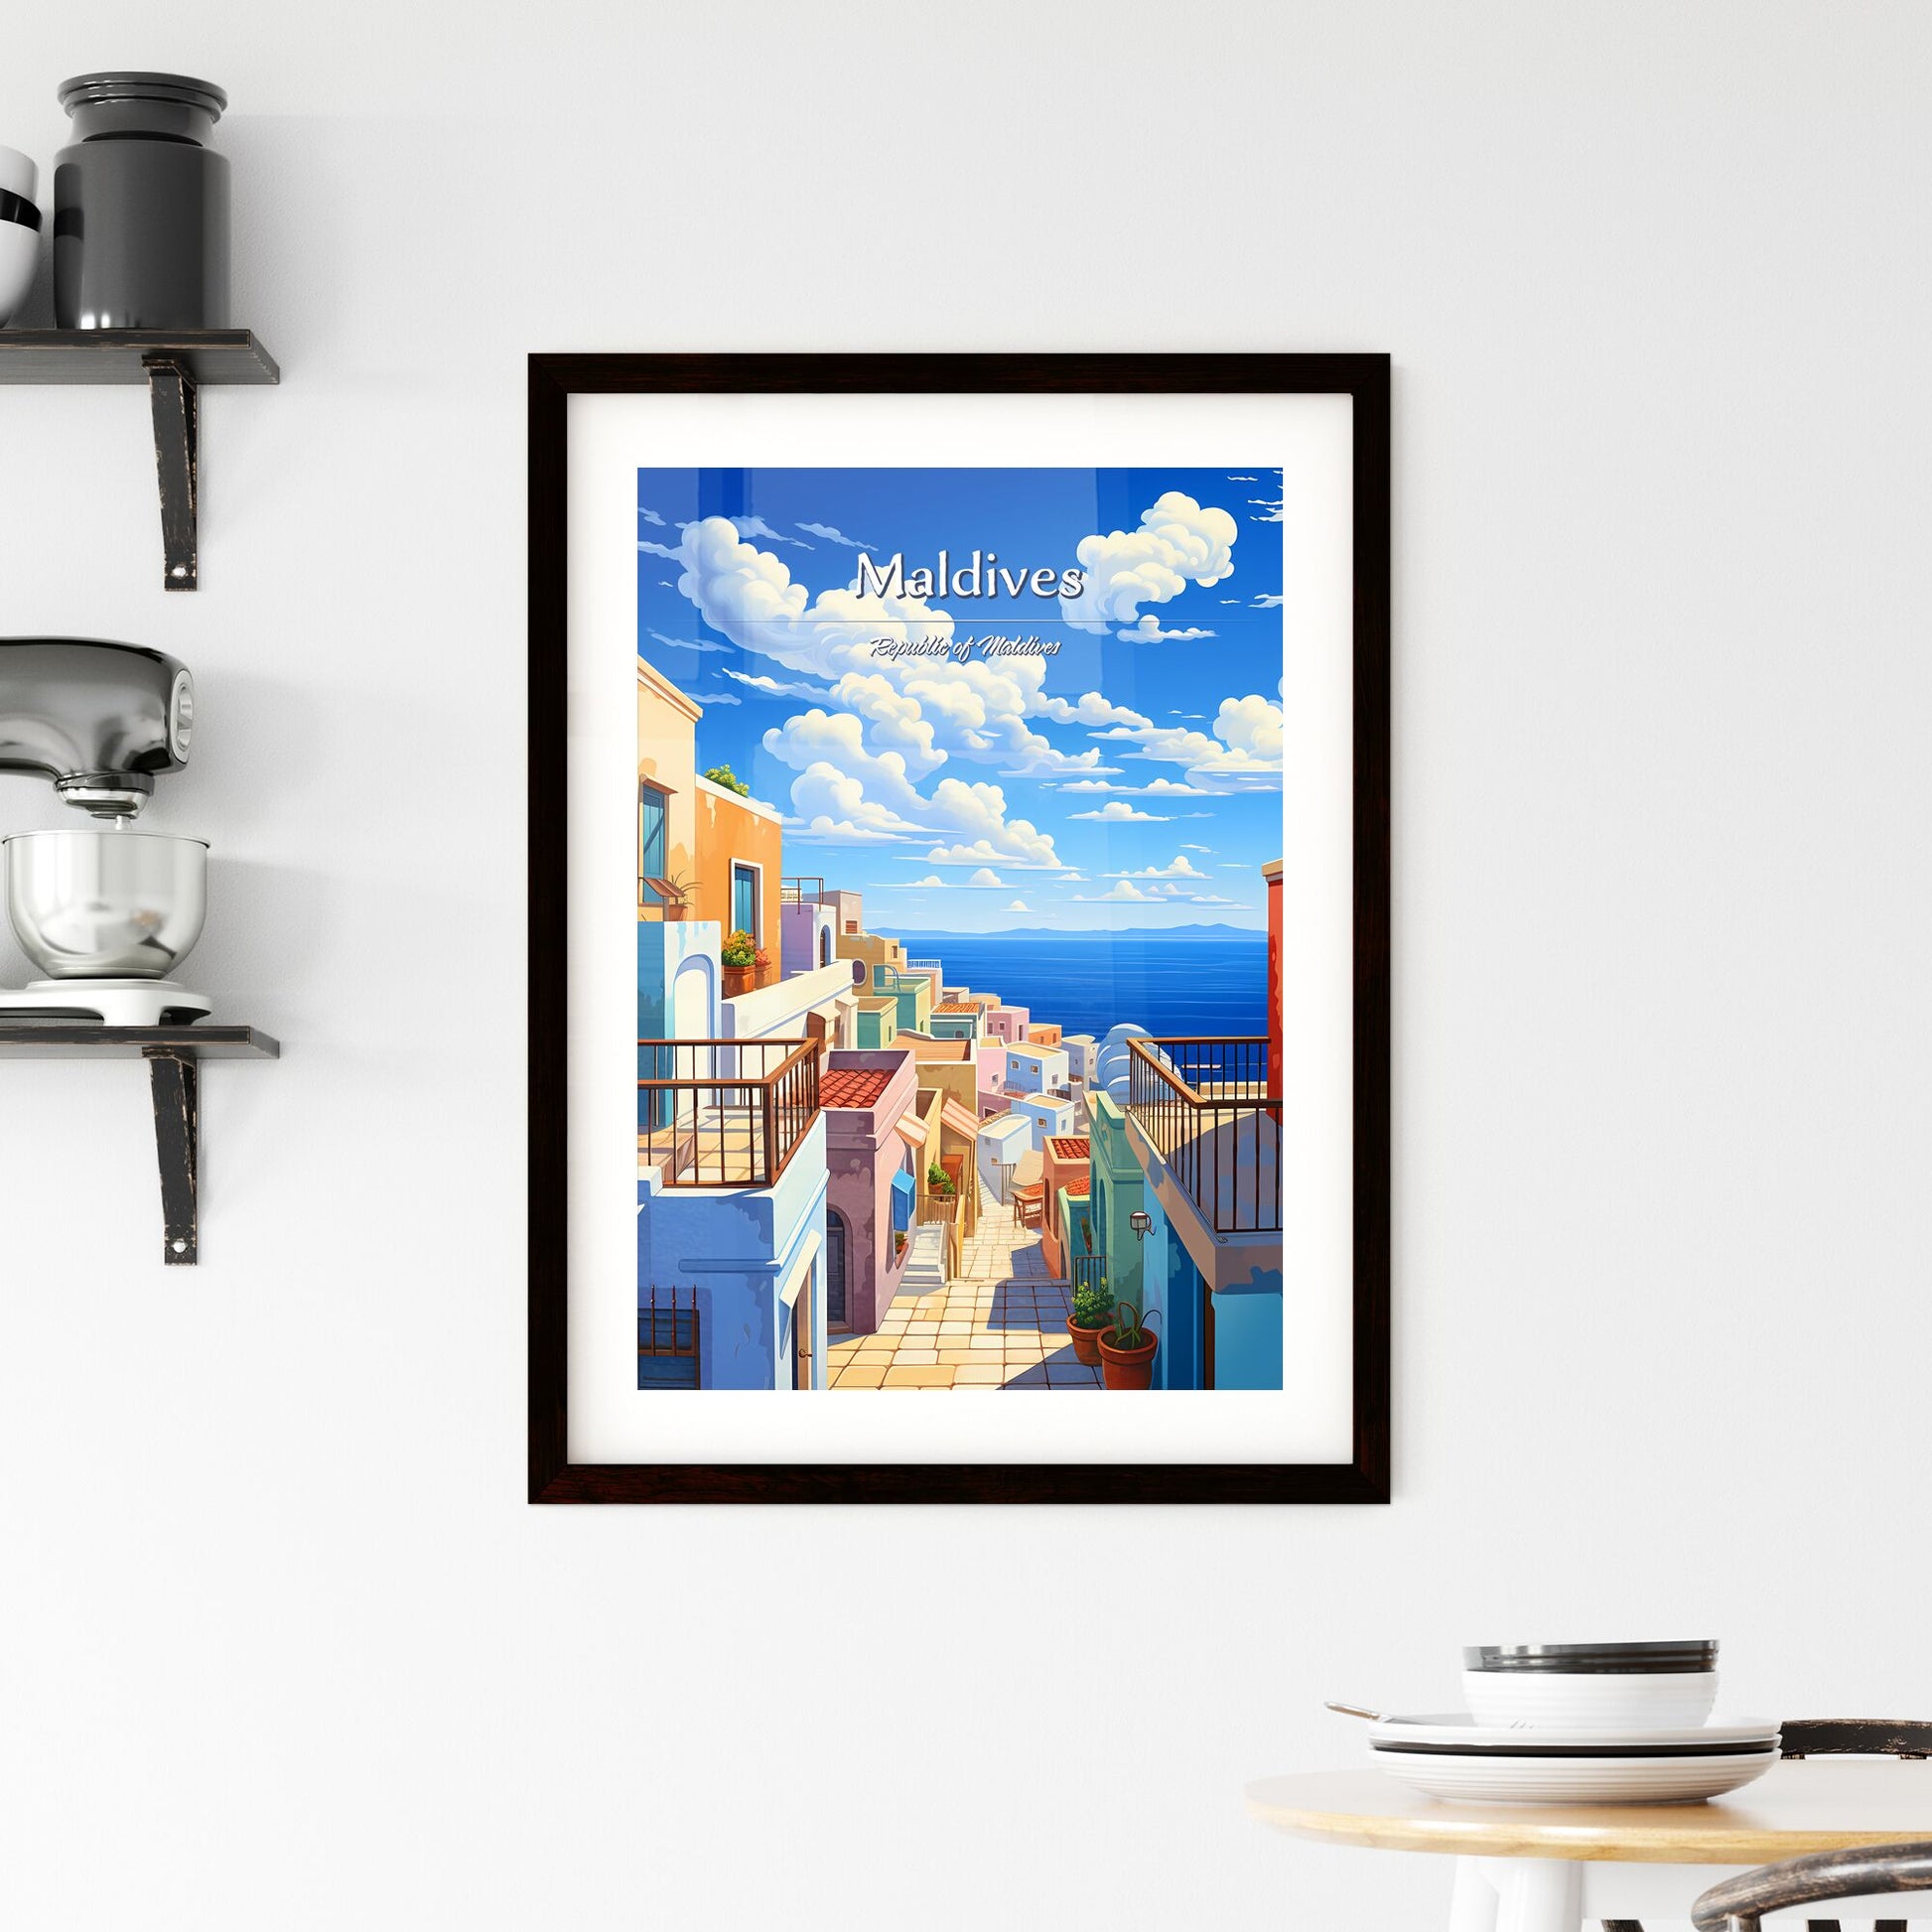 On the roofs of Maldives, Republic of Maldives - Art print of a colorful buildings with a walkway over the water Default Title